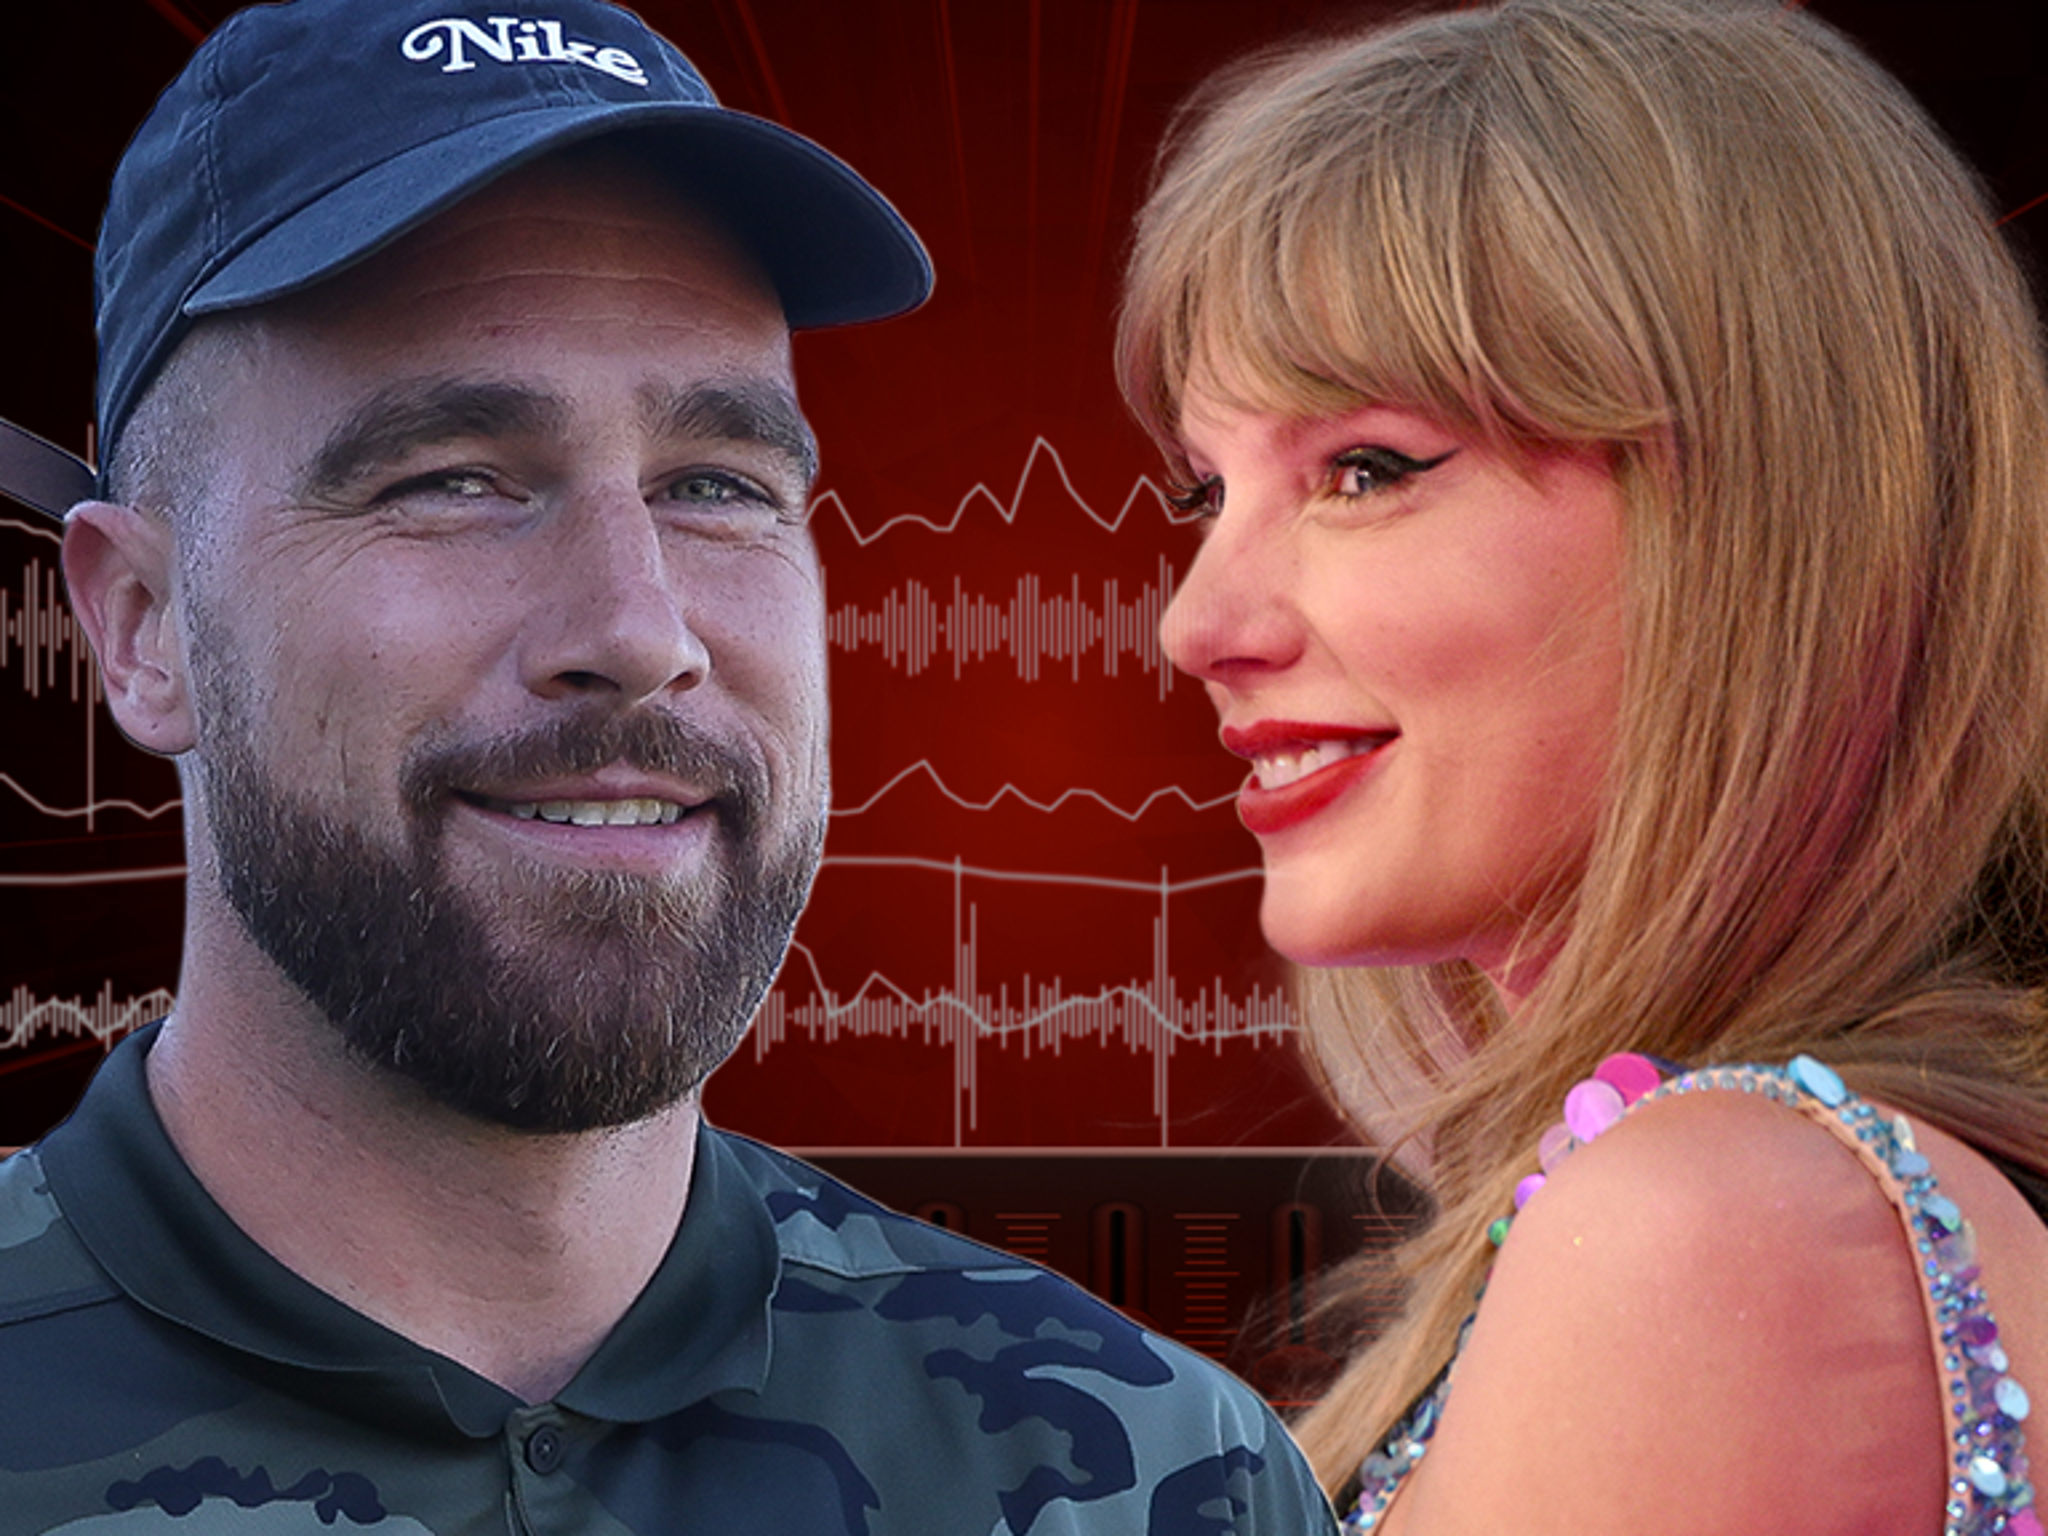 "I've never been a man of words," Kelce said. "Being around her, seeing how smart Taylor is, has been f***ing mind-blowing. I'm learning every day."